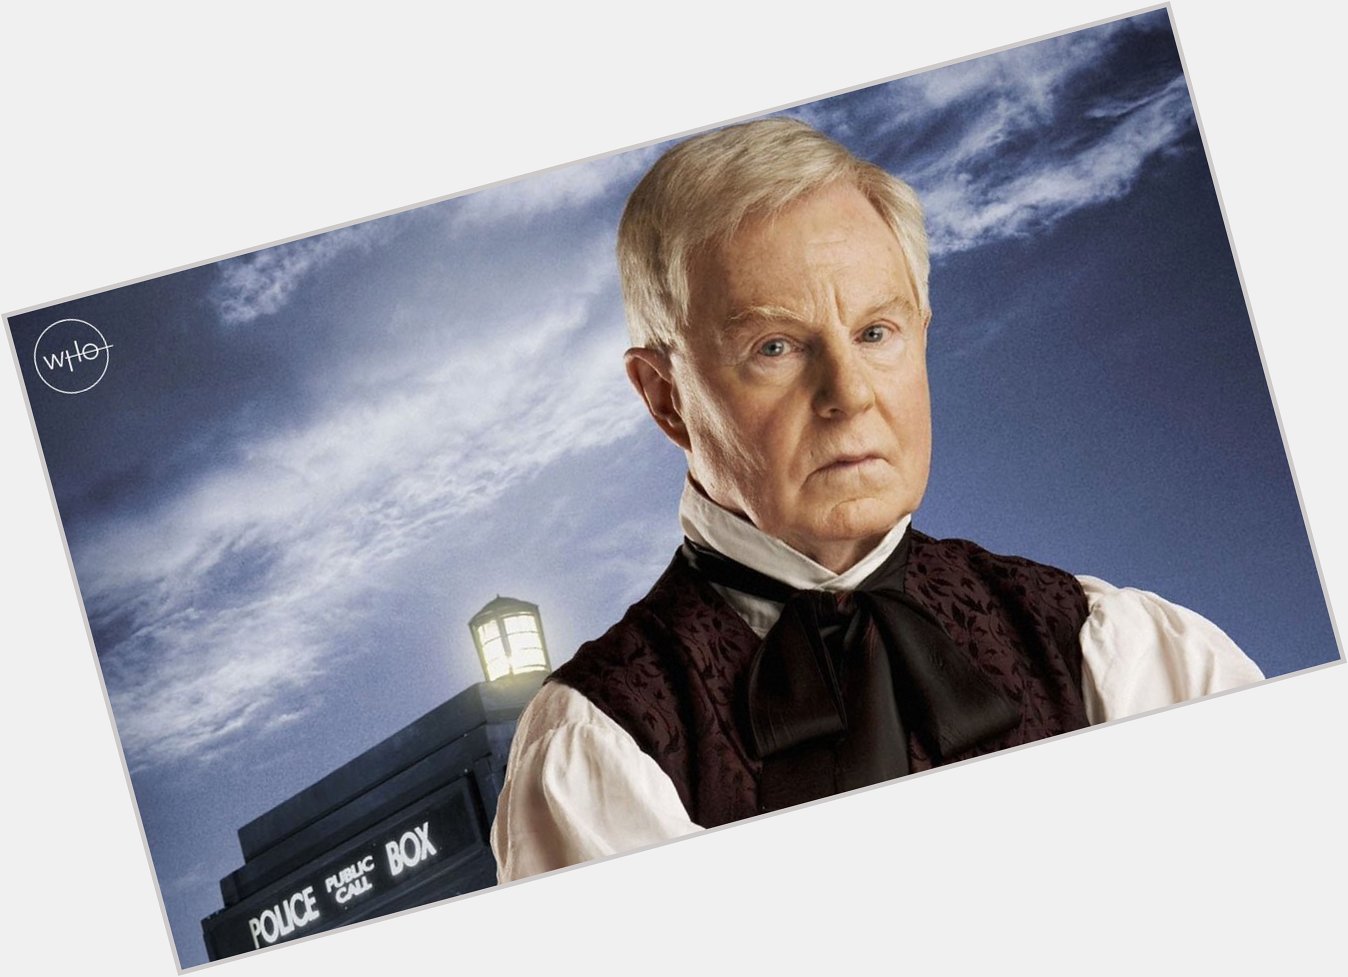 A very happy birthday to Sir Derek Jacobi, who played an electrifying regeneration of the Master in 2007!  